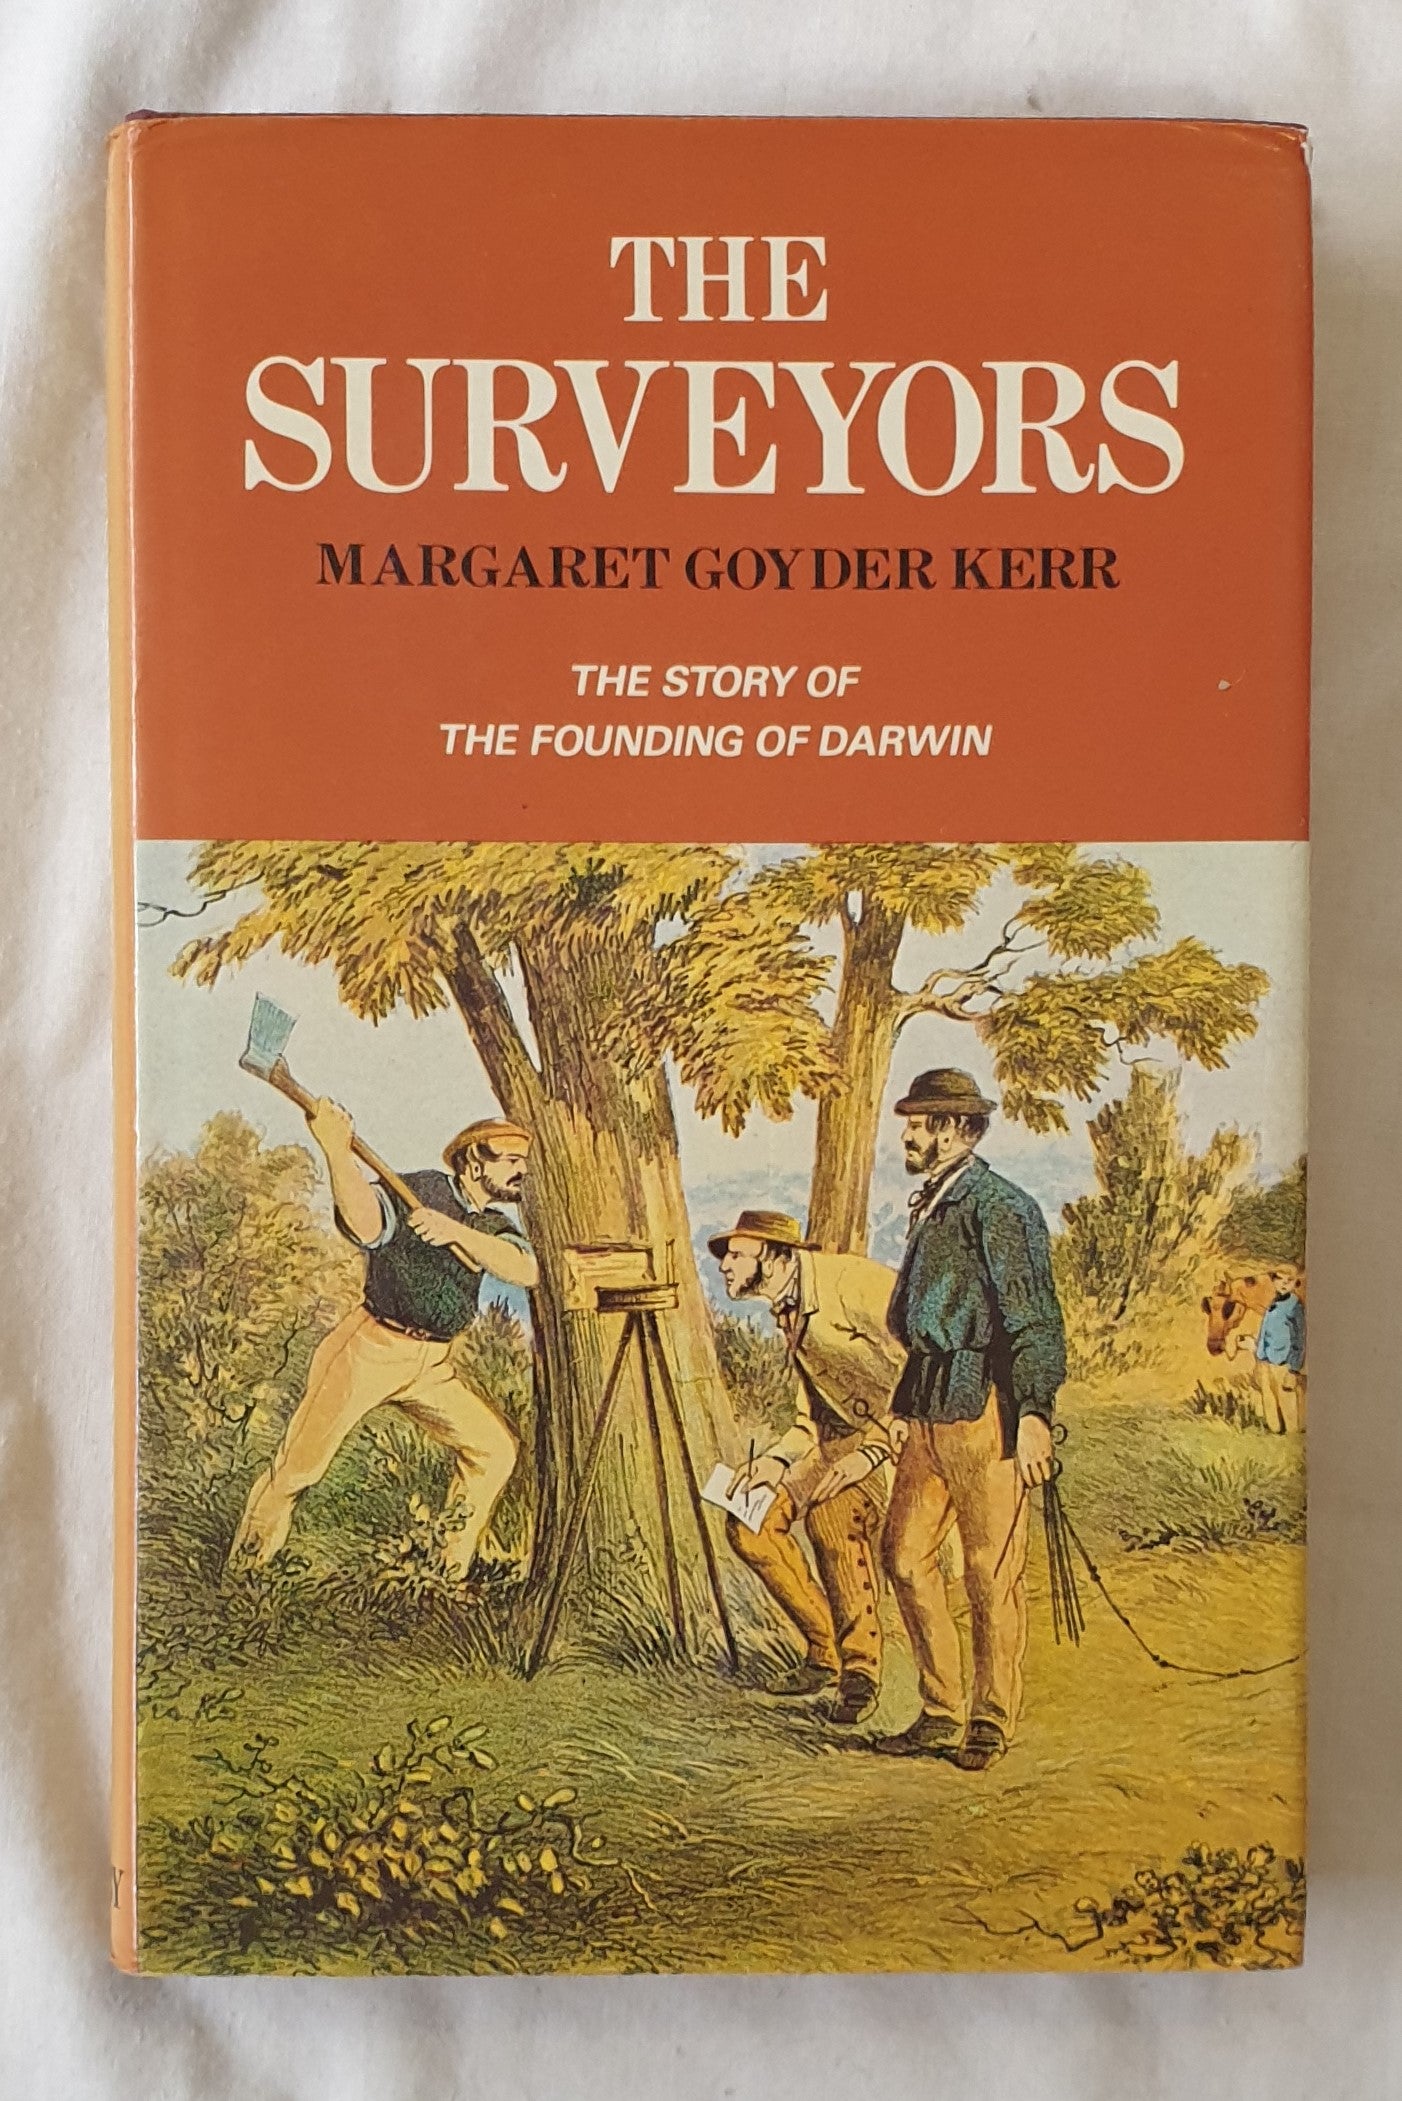 The Surveyors  The story of the founding of Darwin  by Margaret Goyder Kerr